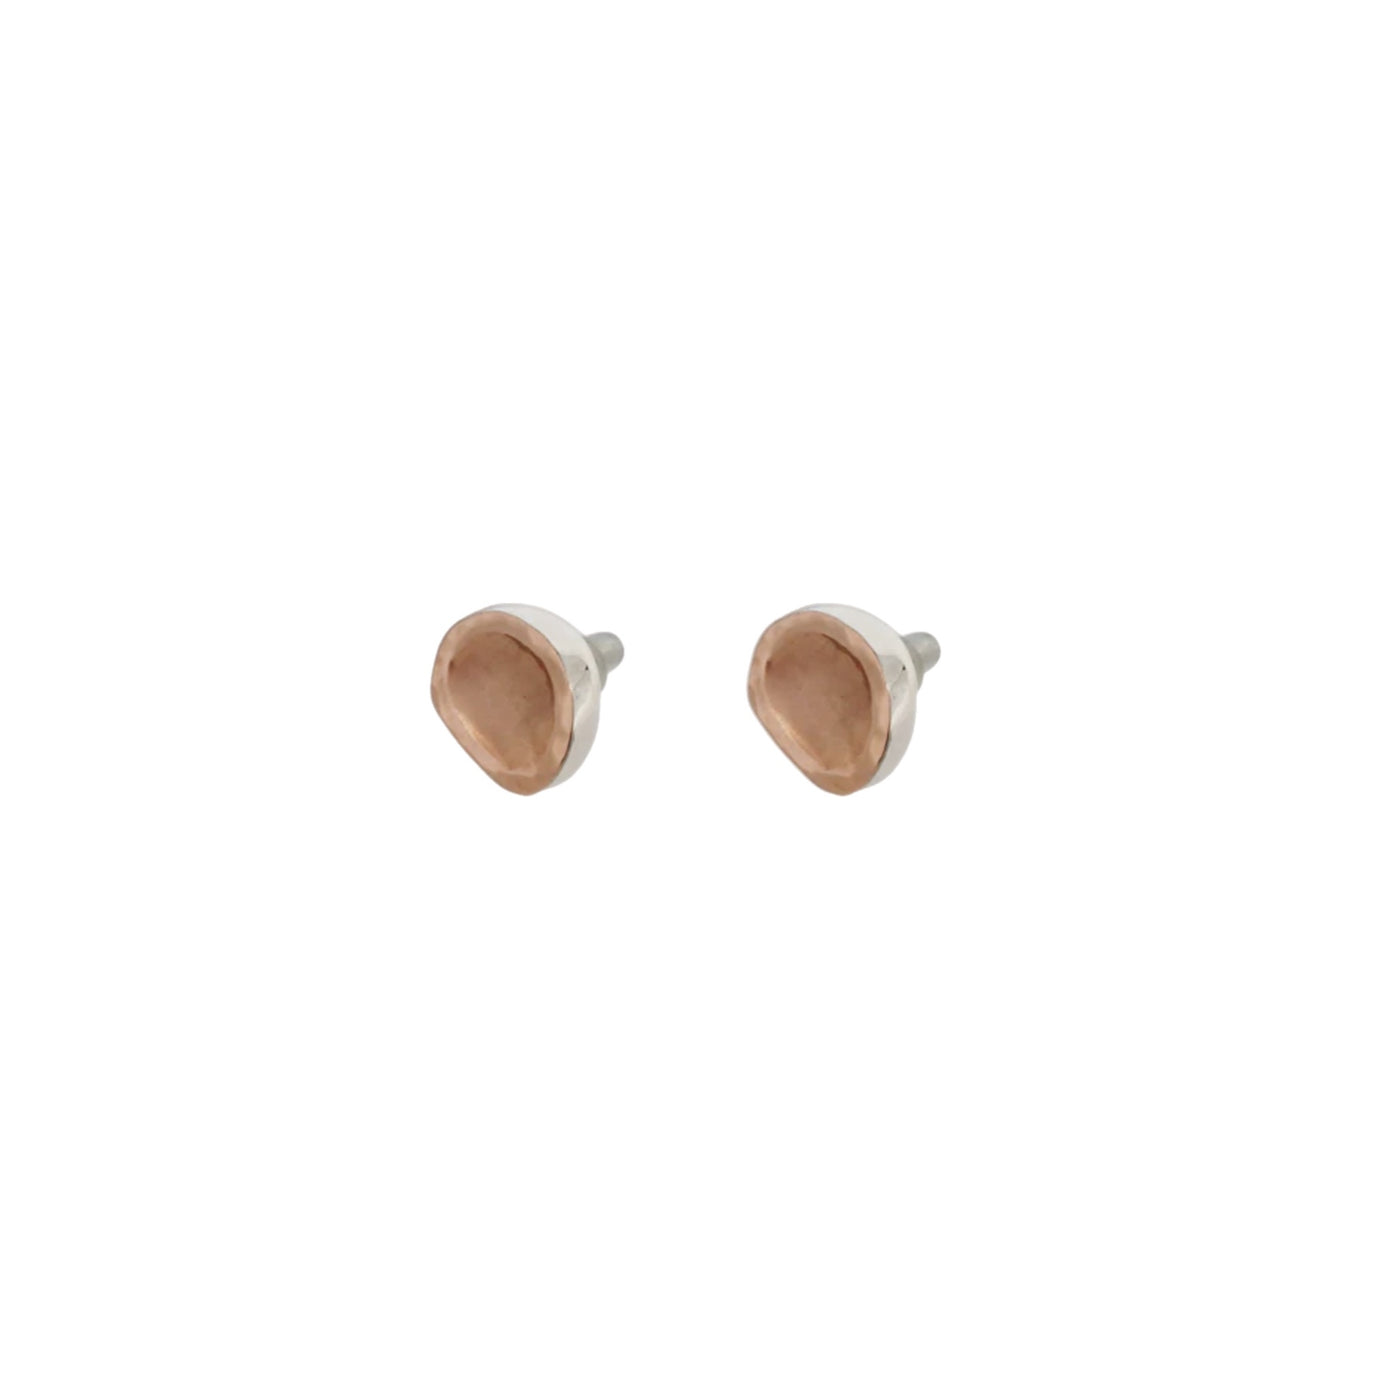 Sterling silver and 9ct rose gold handcrafted Israeli stud earrings